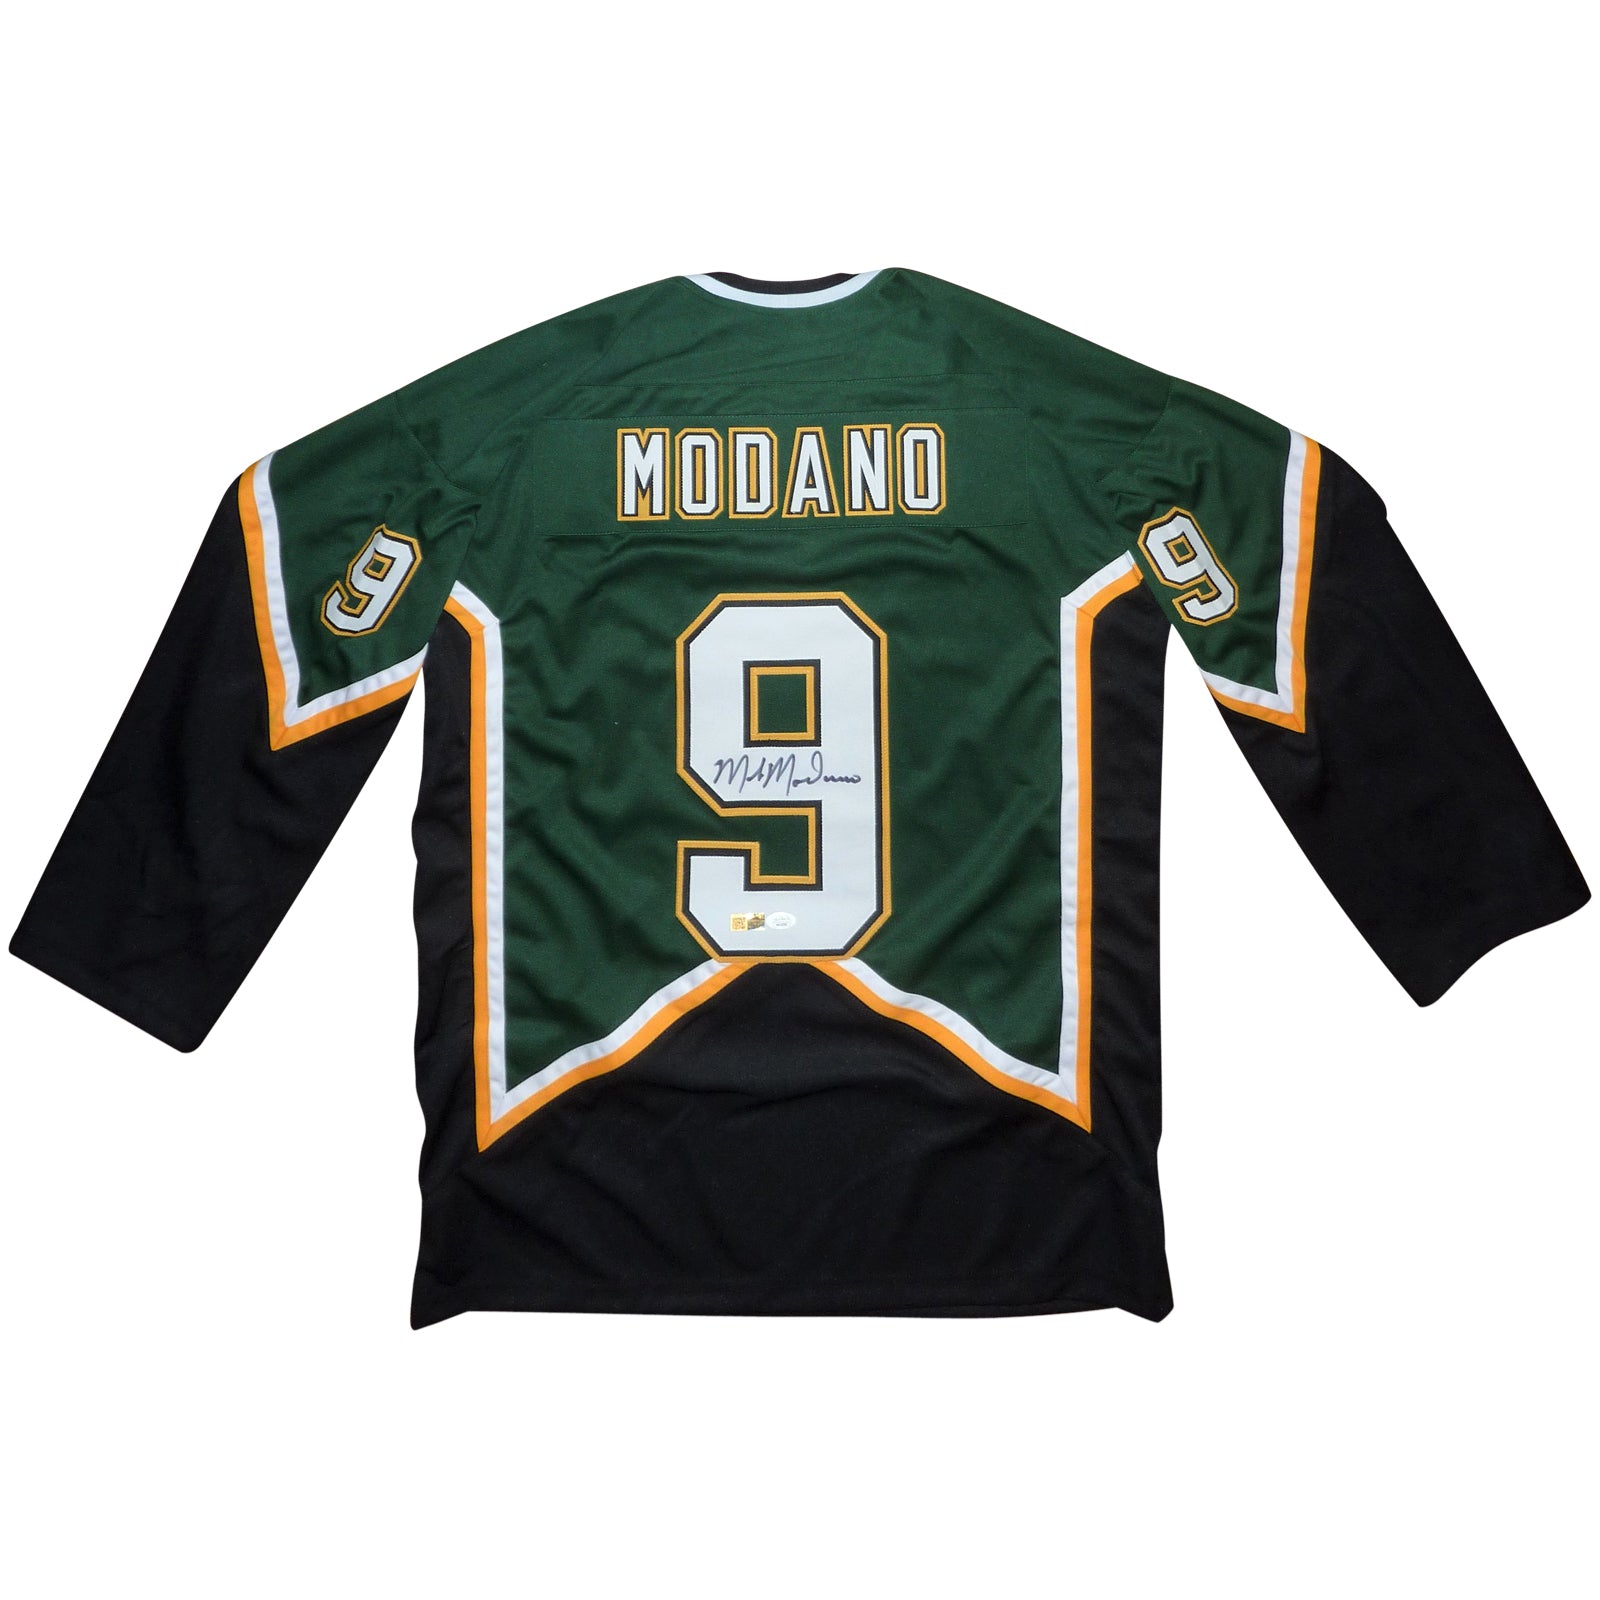 Upgrade Your Game with Stitched NFL Jersey